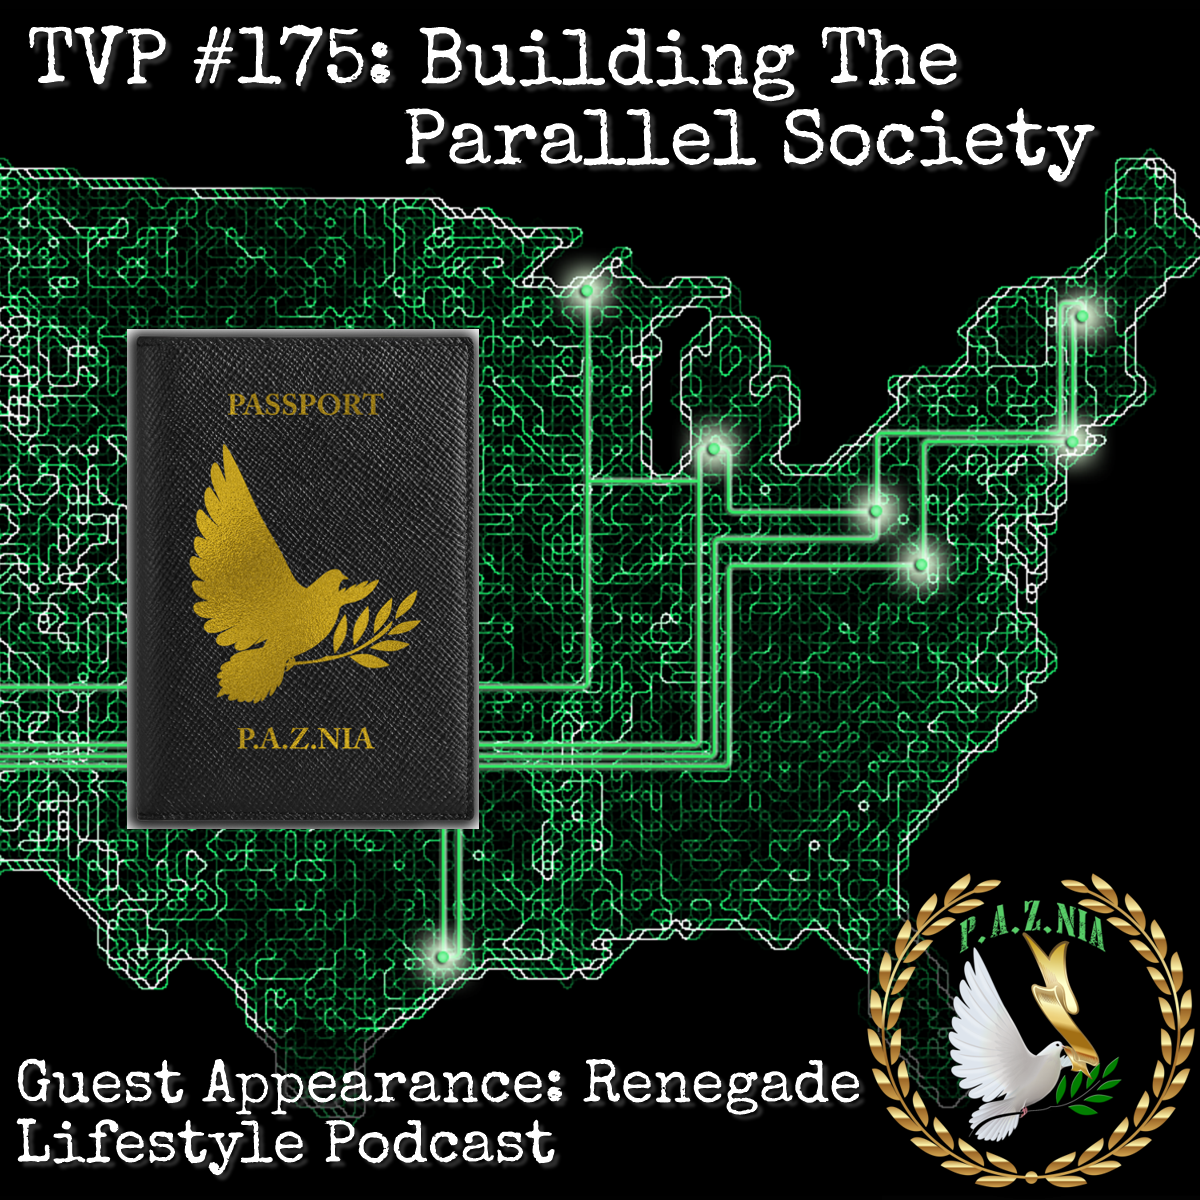 TVP #175: Building The Parallel Society with Rayo2 (Guest Appearance on Renegade Lifestyle Podcast)